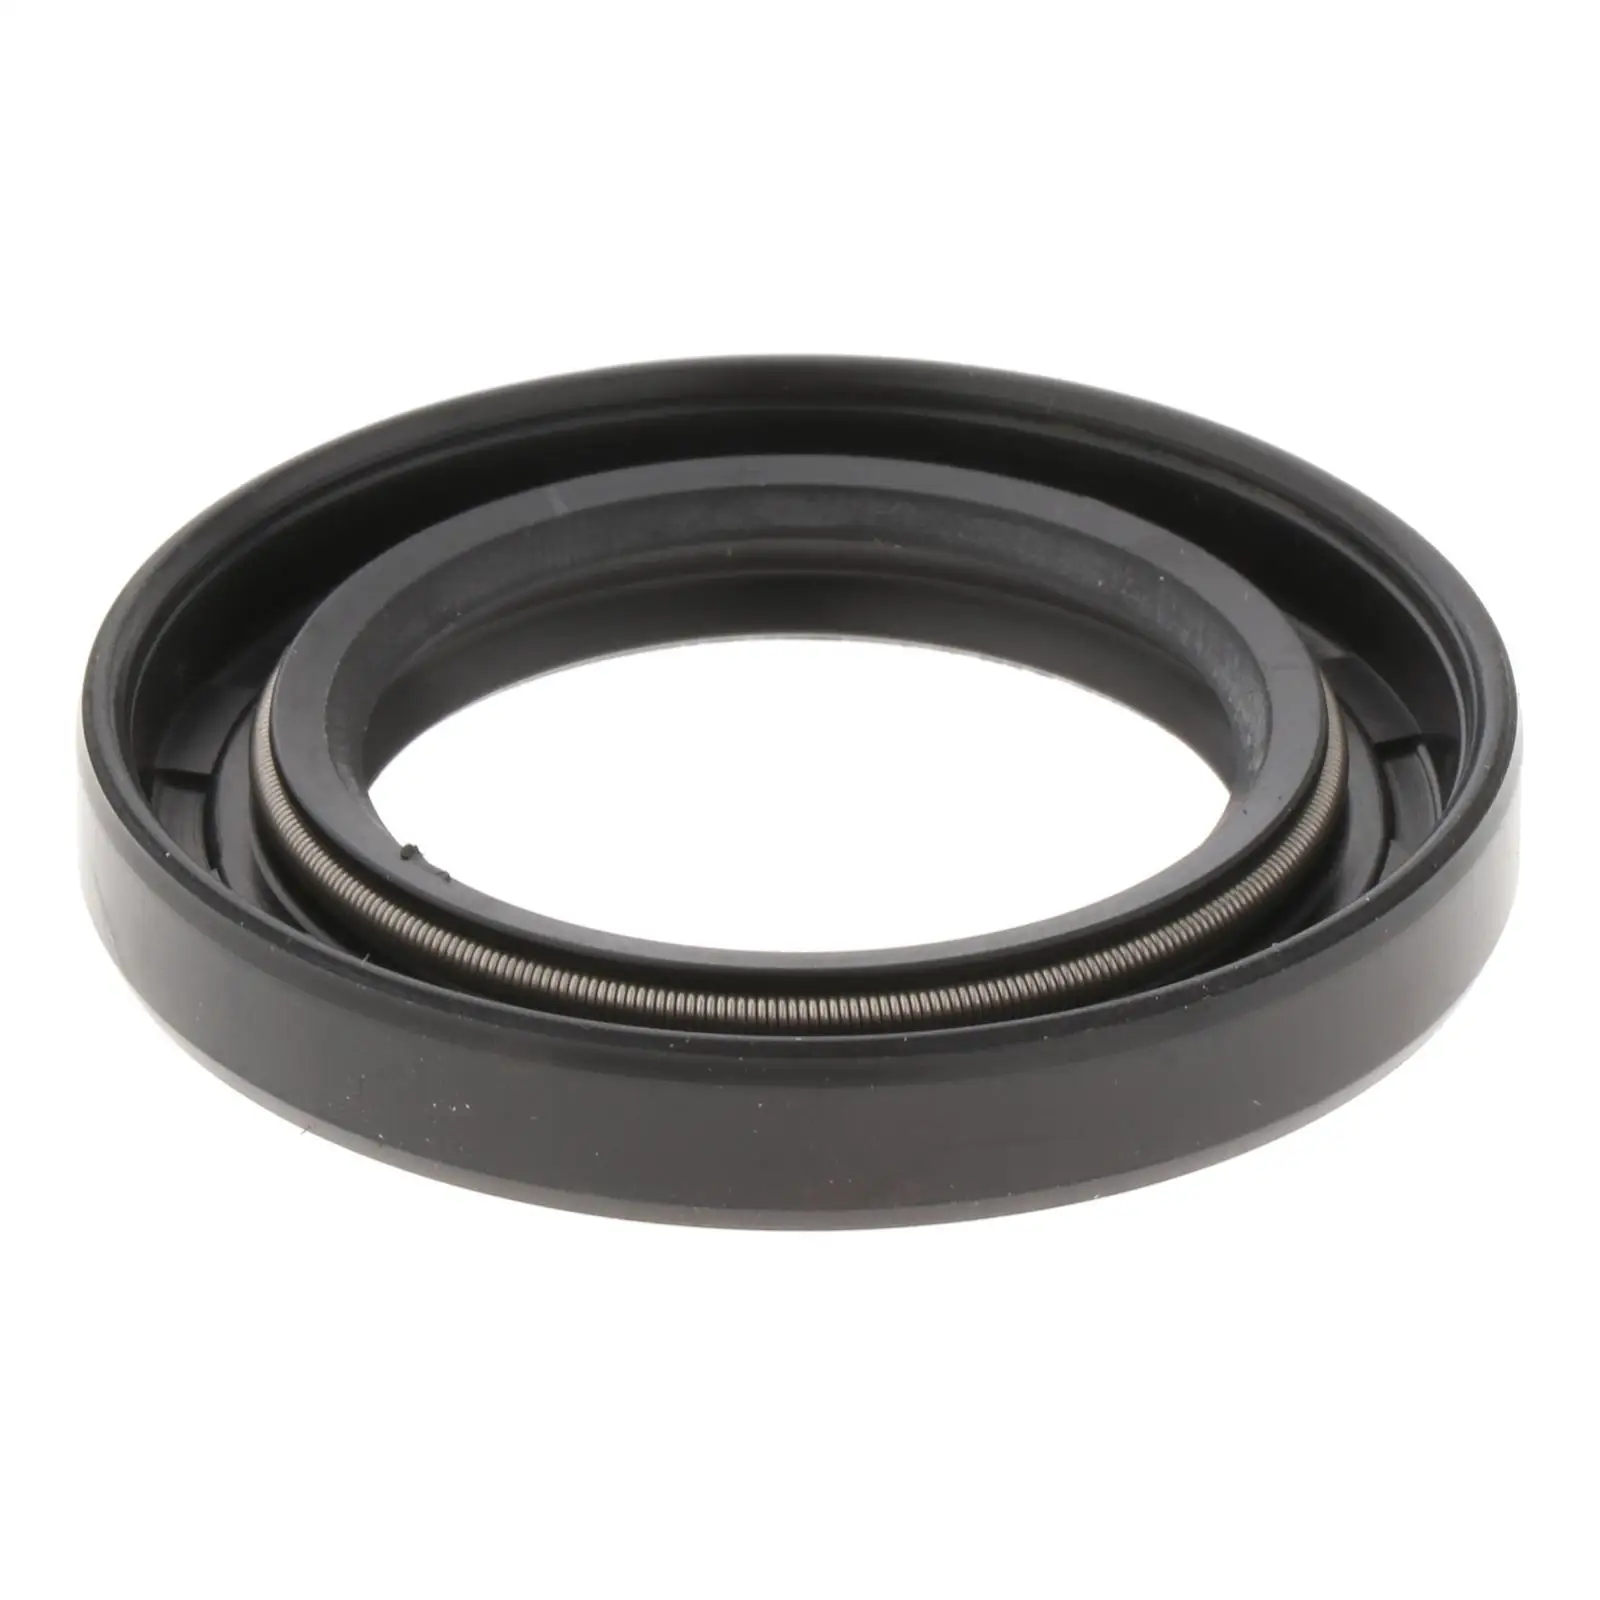 Oil Seal Fit for Yamaha Outboard Motor 2T 60HP-90HP Spare Parts Accessory